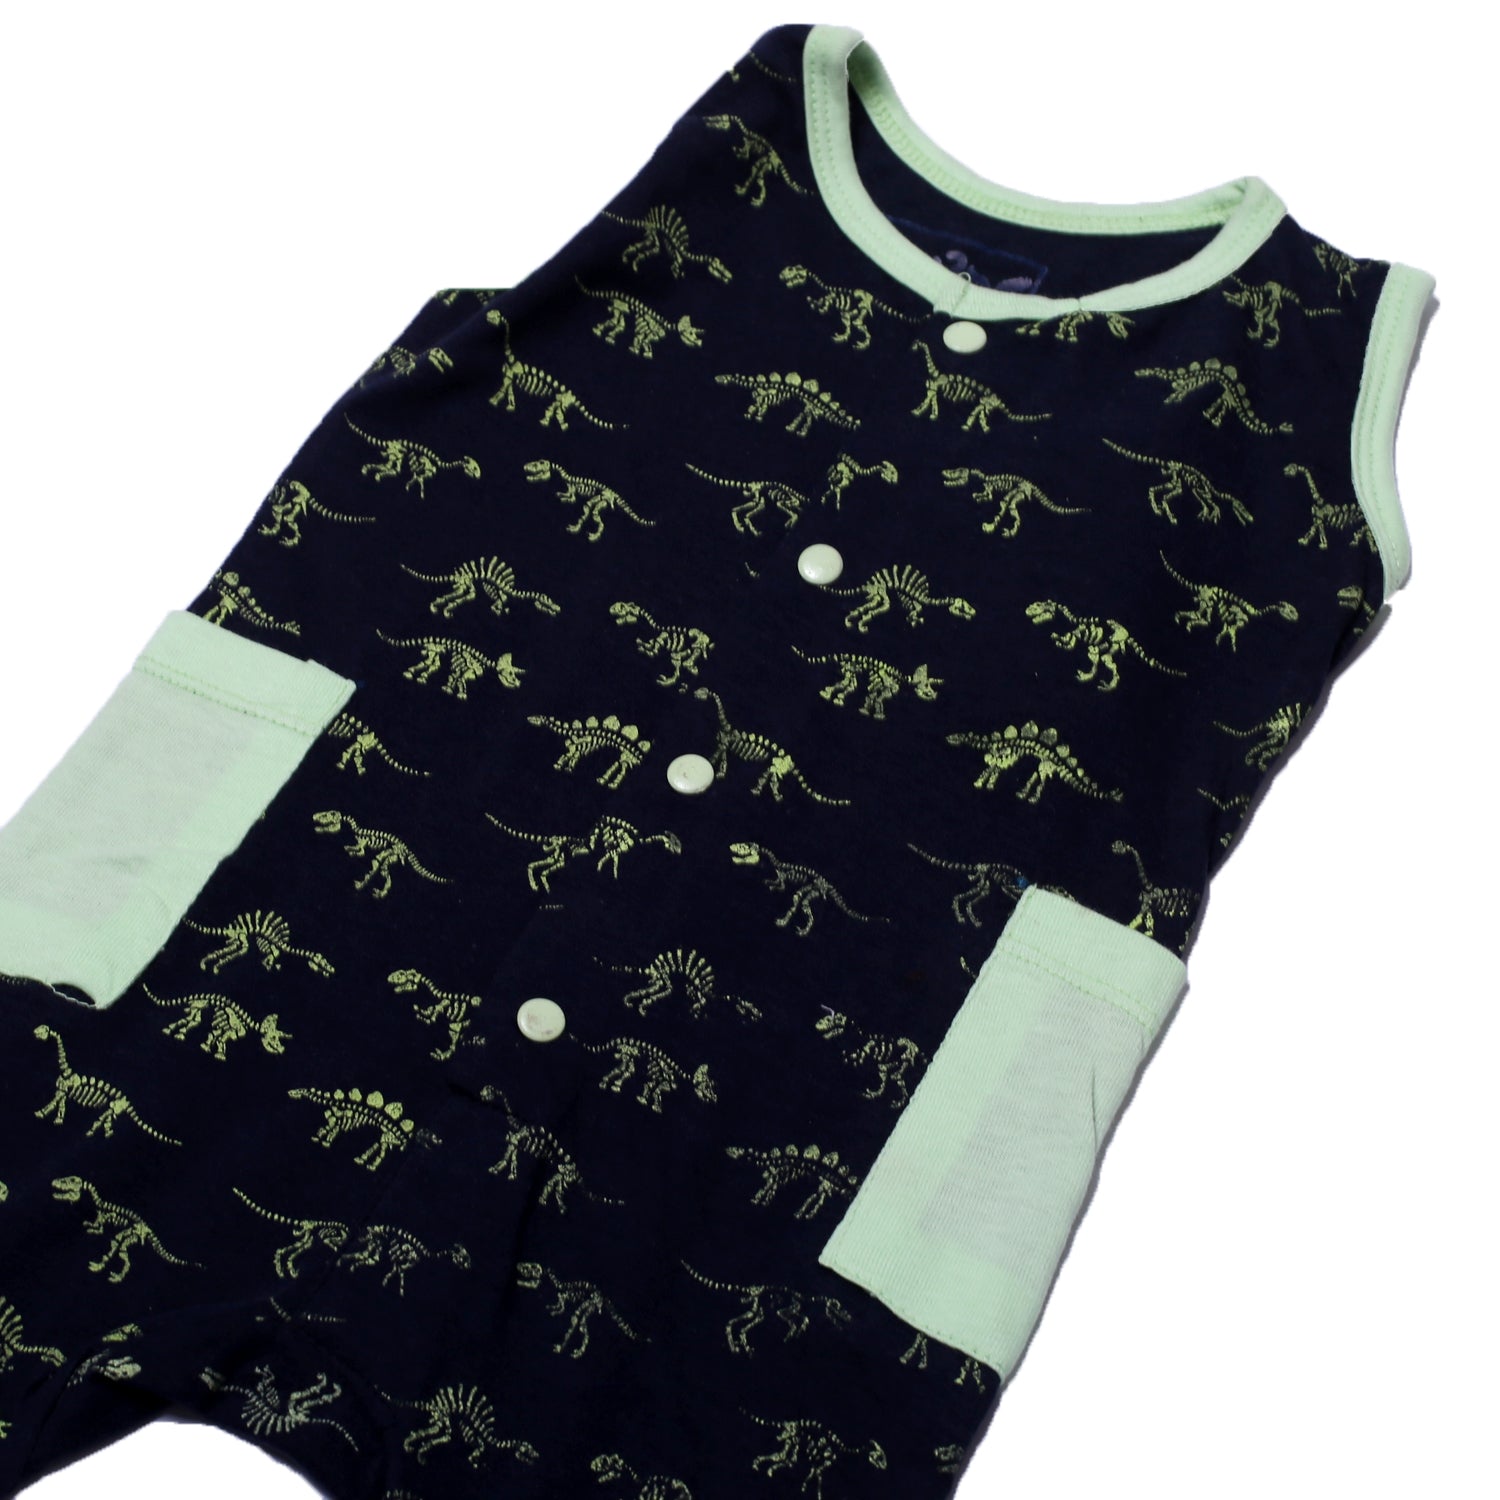 NEW NAVY BLUE FULL BODY SLEEVE LESS DINO SKELETON PRINTED WITH POCKETS ROMPER